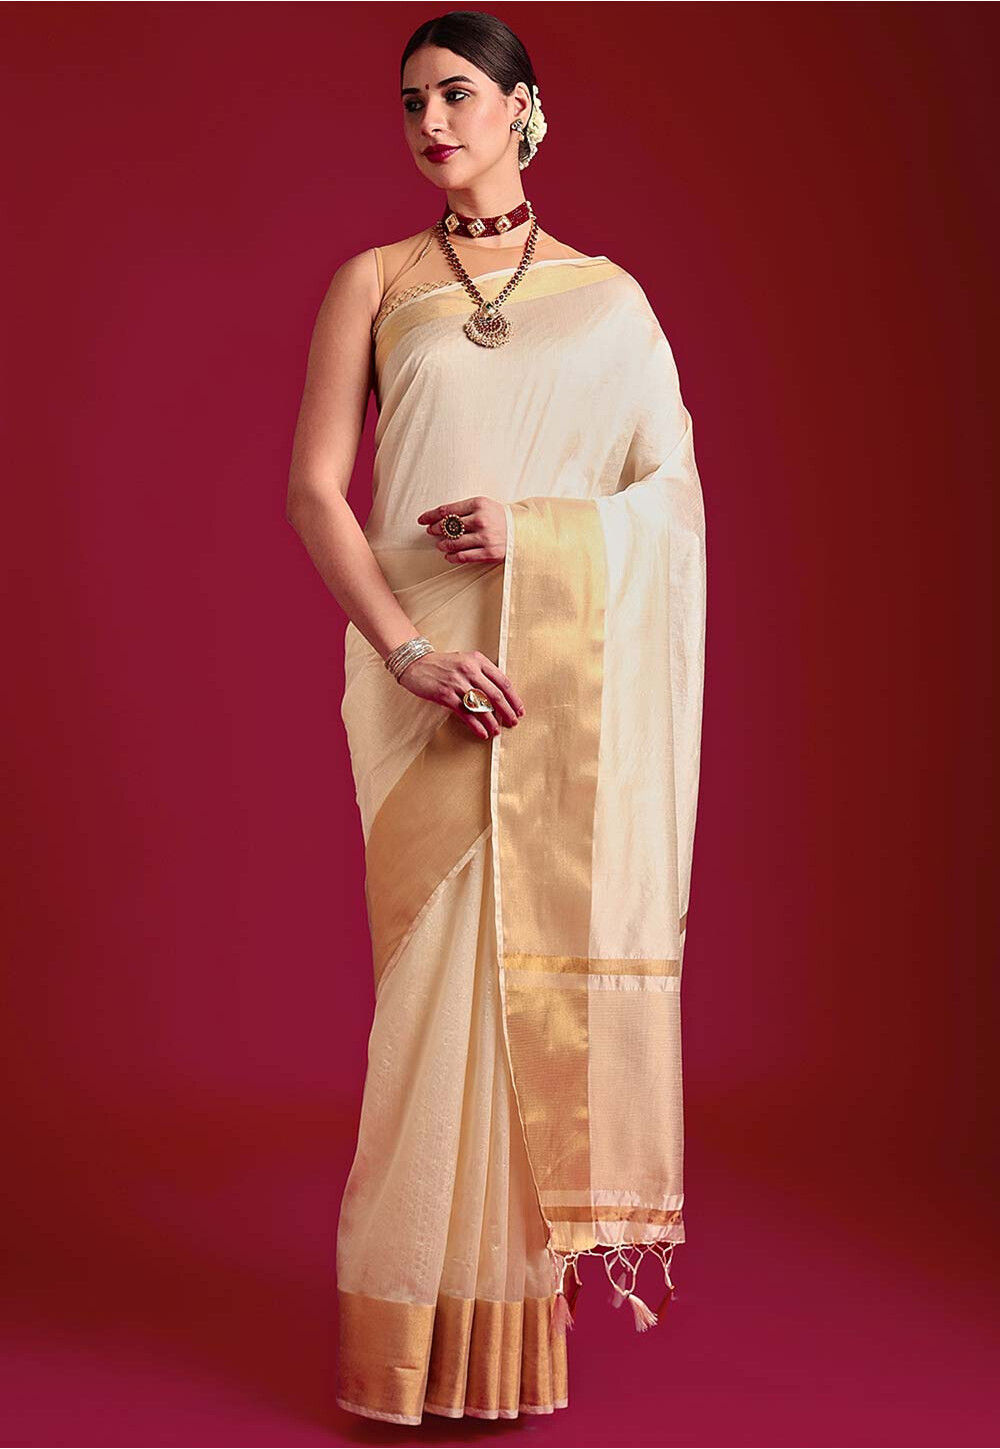 Buy Traditional Kerala Saree Online at the Best Price | HARADHI